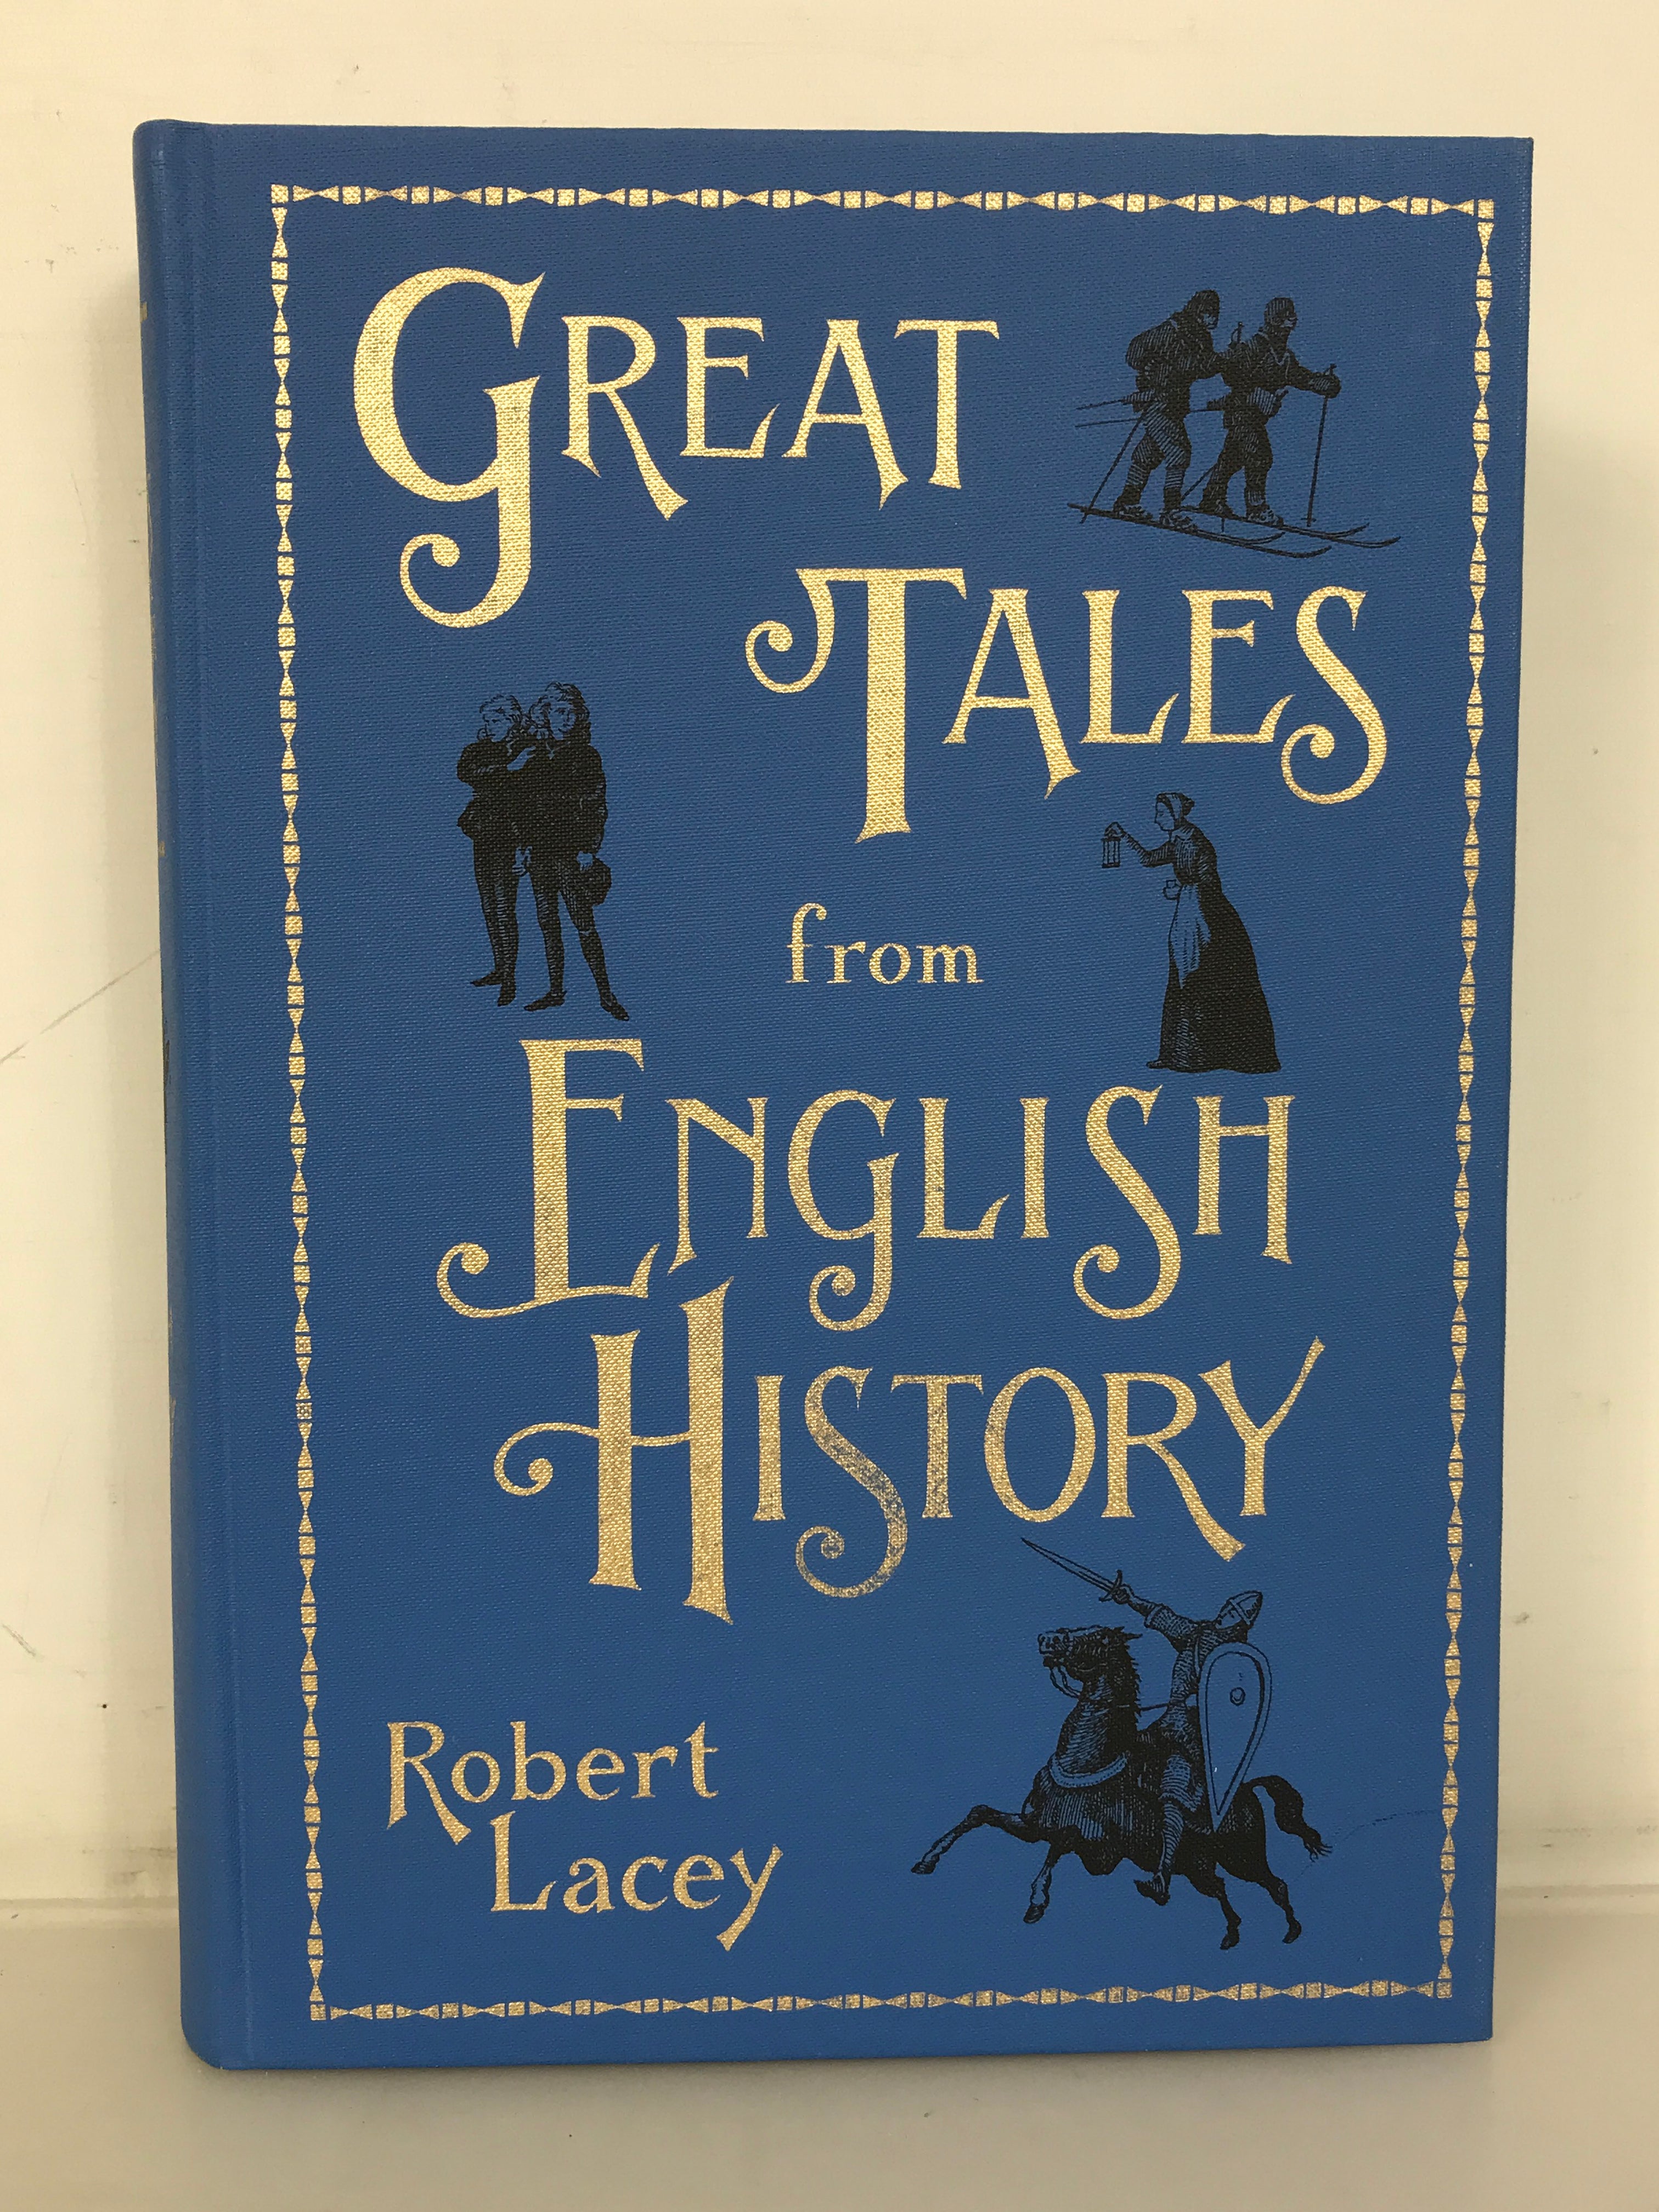 Great Tales from English History by Robert Lacey 2008 The Folio Society HC